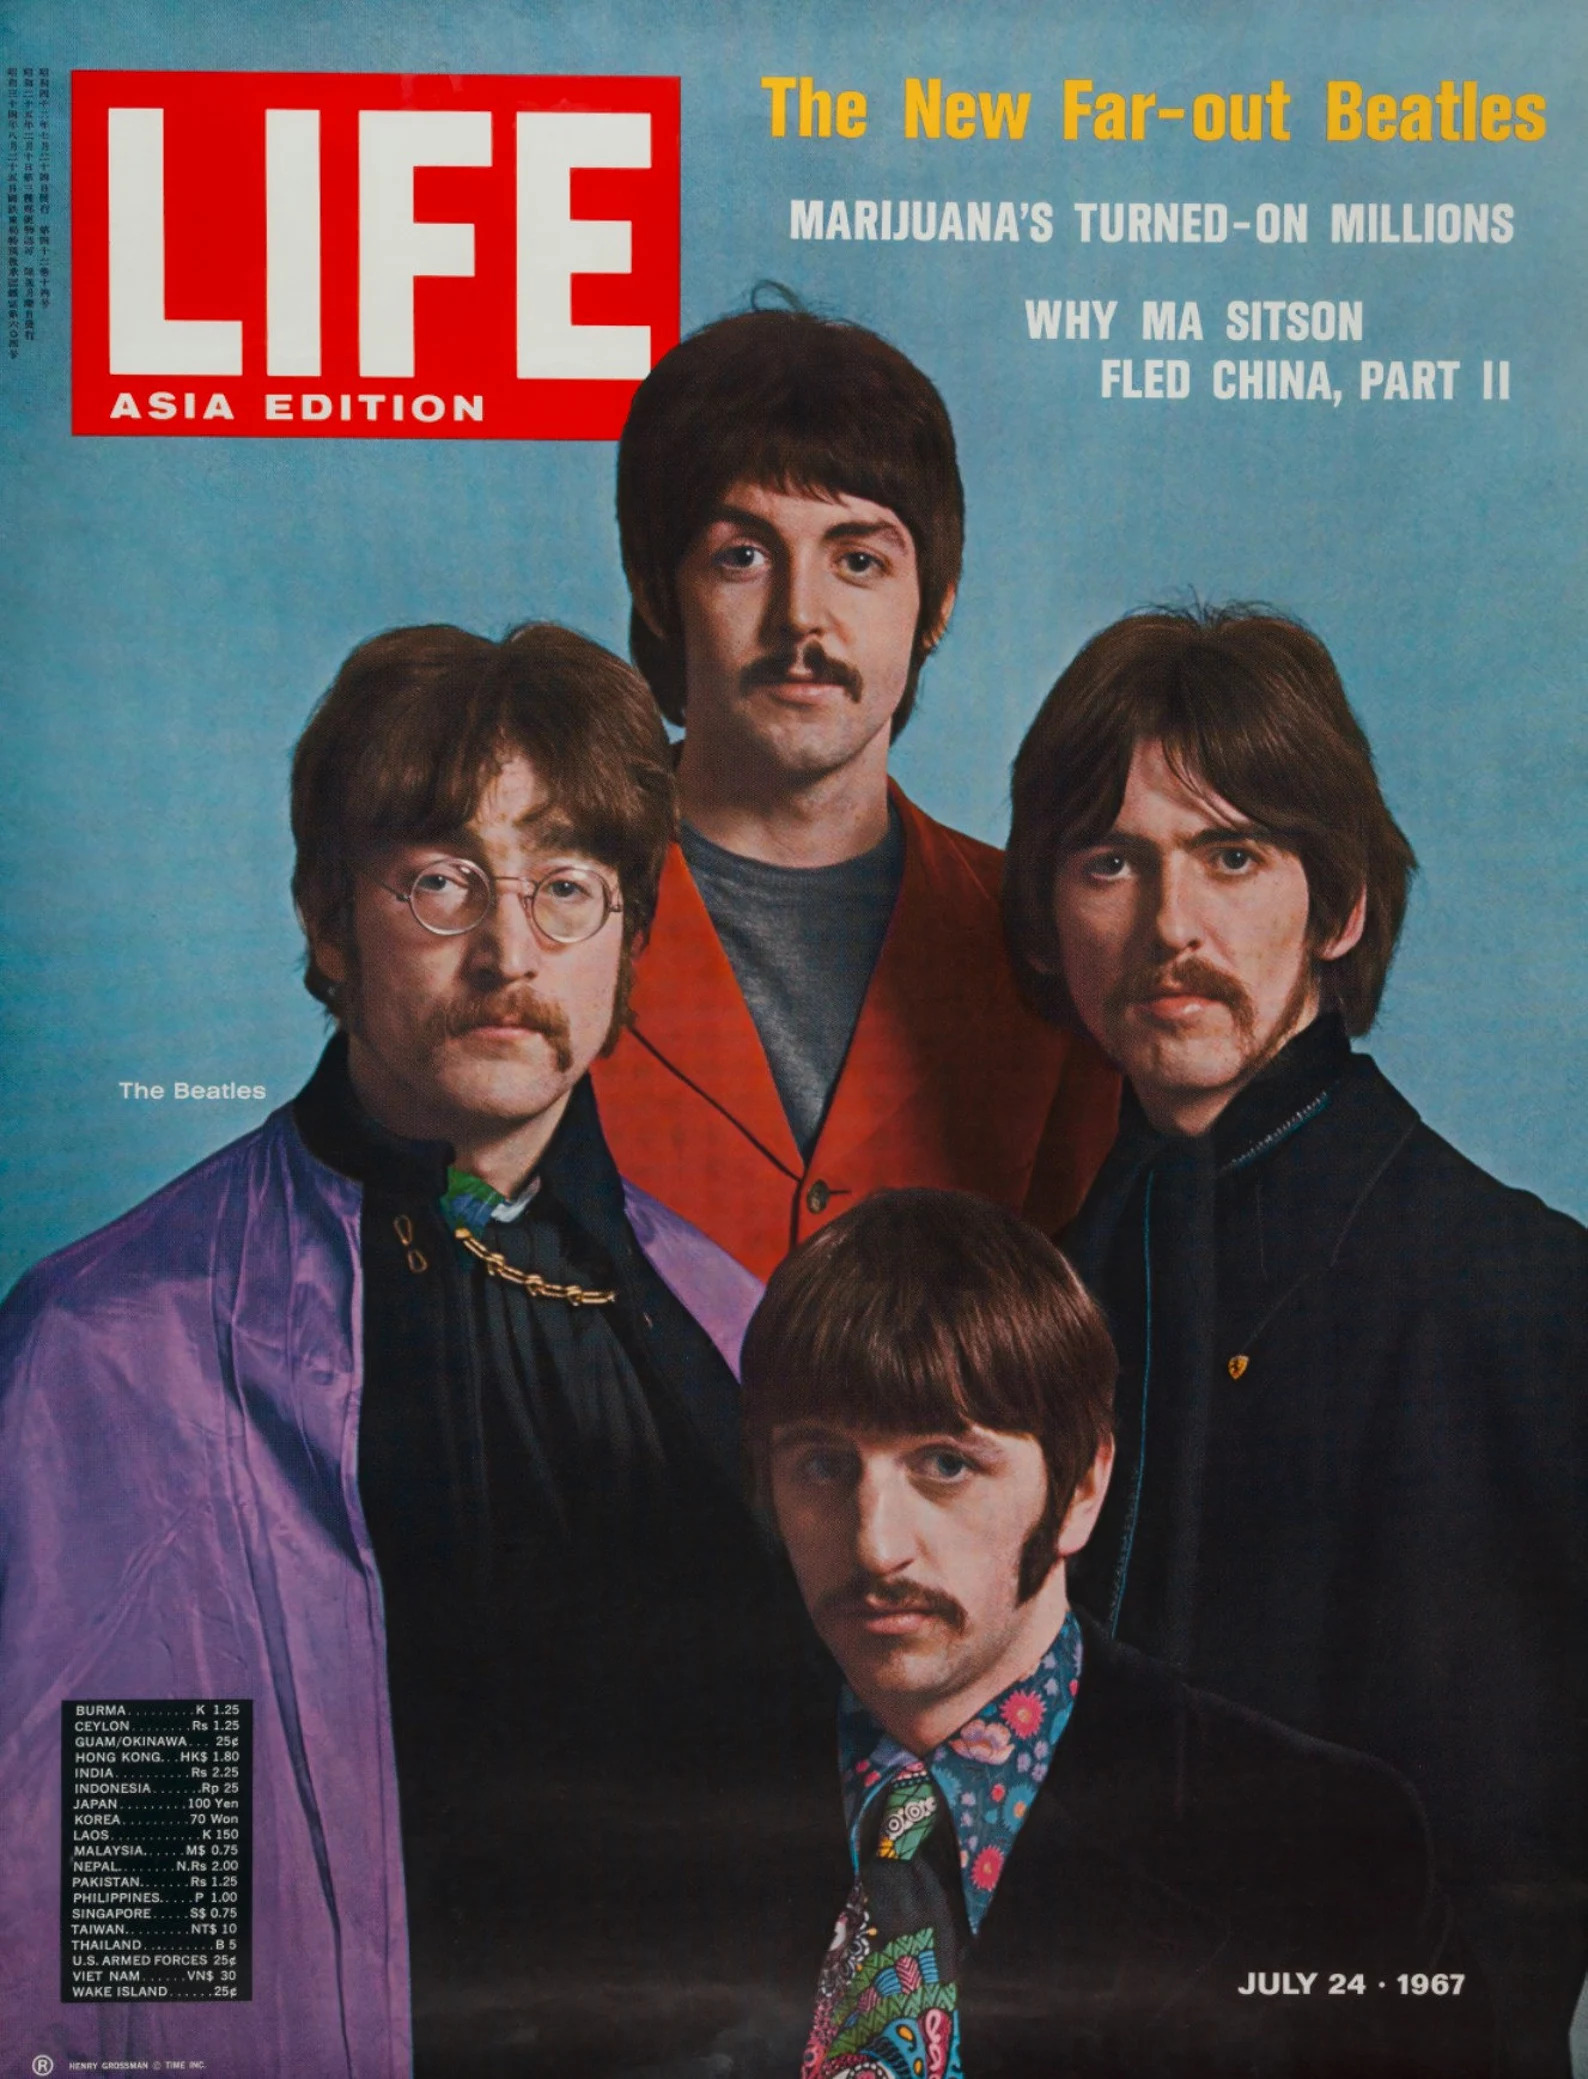 Beatles Life Magazine Newsstand Poster (Life Magazine, 1967). (Approx 27x34 inches).